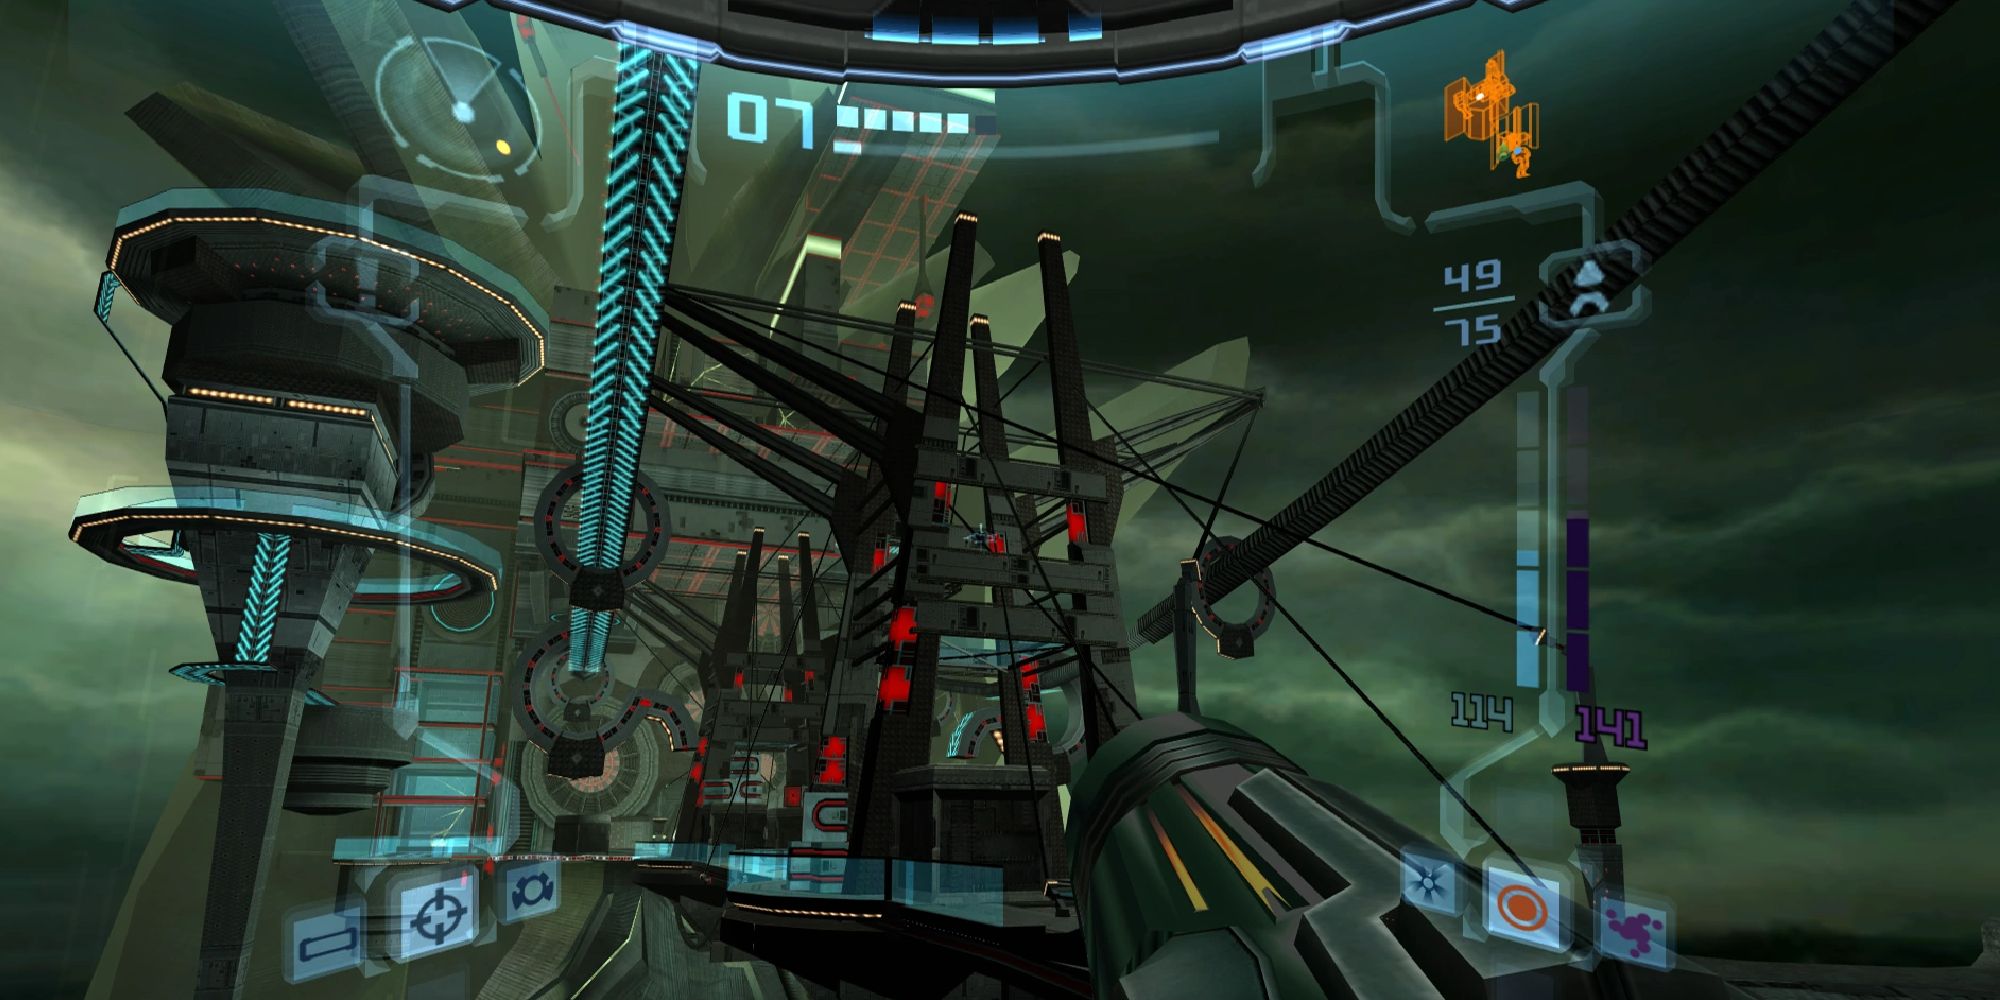 Samus' first-person view of the entrance to Sanctuary Fortress' main temple in Metroid Prime 2